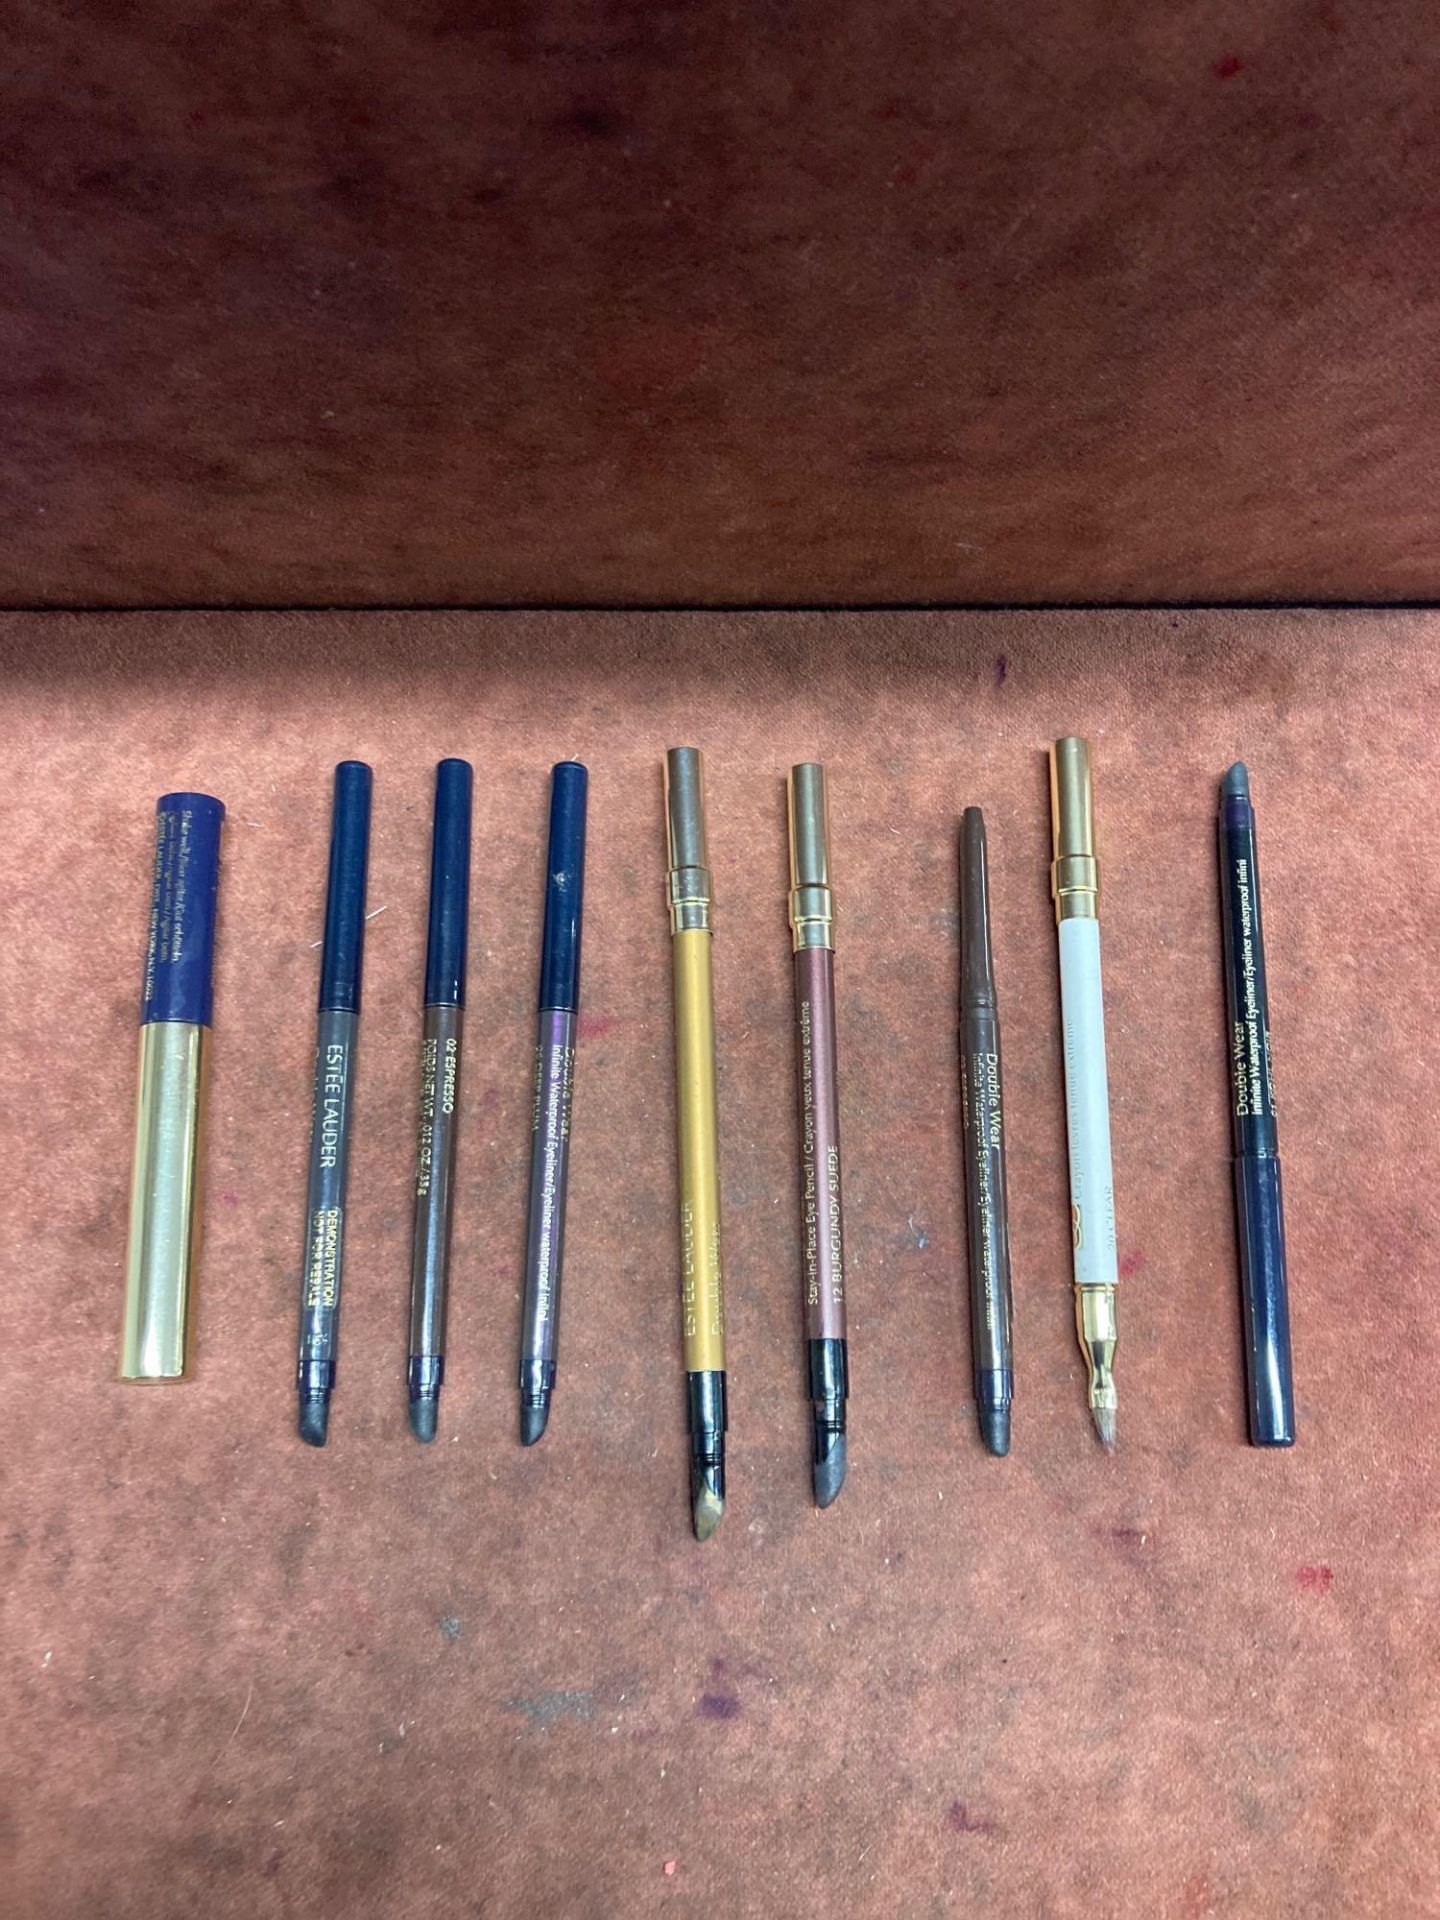 (Jb) RRP £200 Lot To Contain 10 Testers Of Assorted Premium Estee Lauder Makeup Pencils Ex-Display A